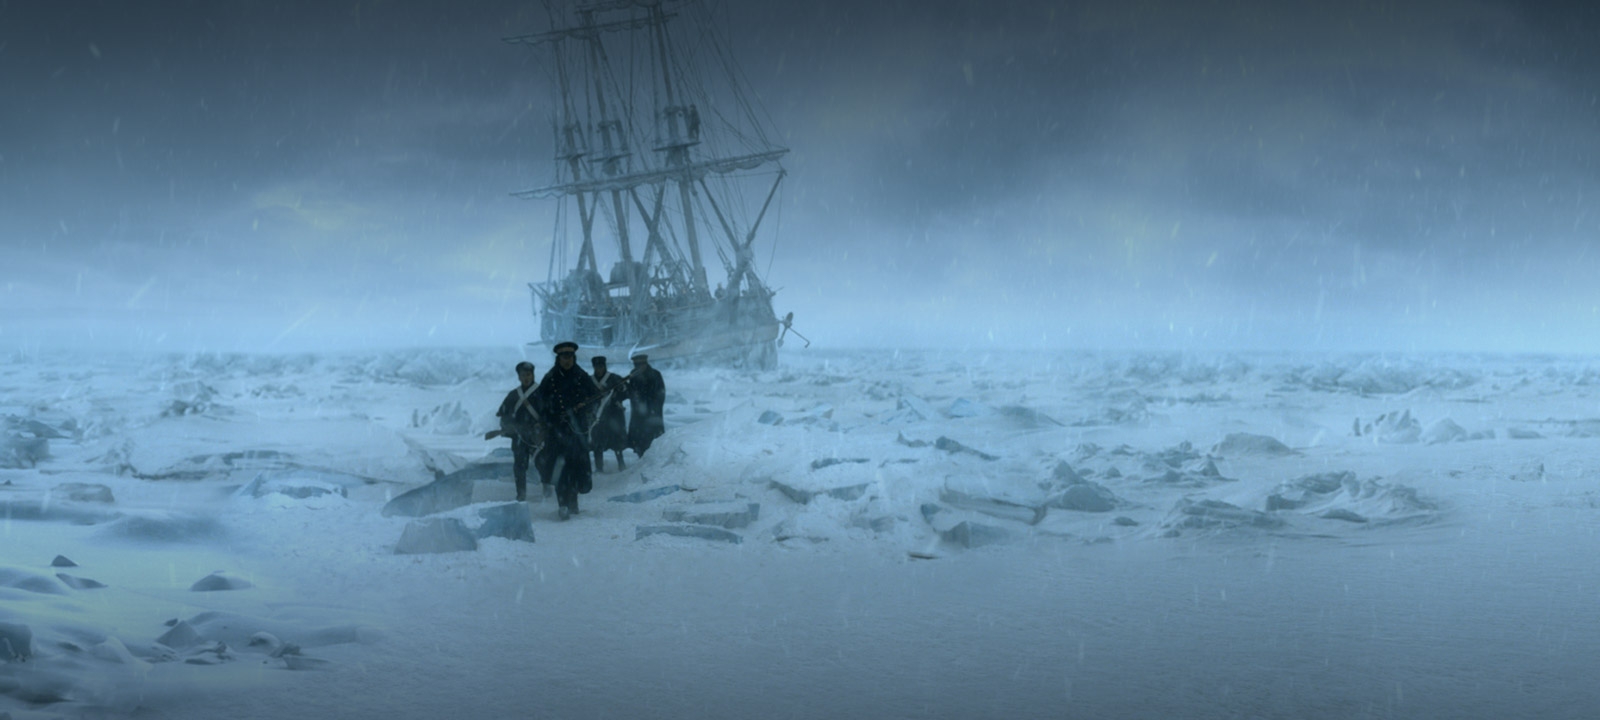 serie,tv,the terror,expedition,aventure,polaire,franklin,1840,passage,nord-ouest